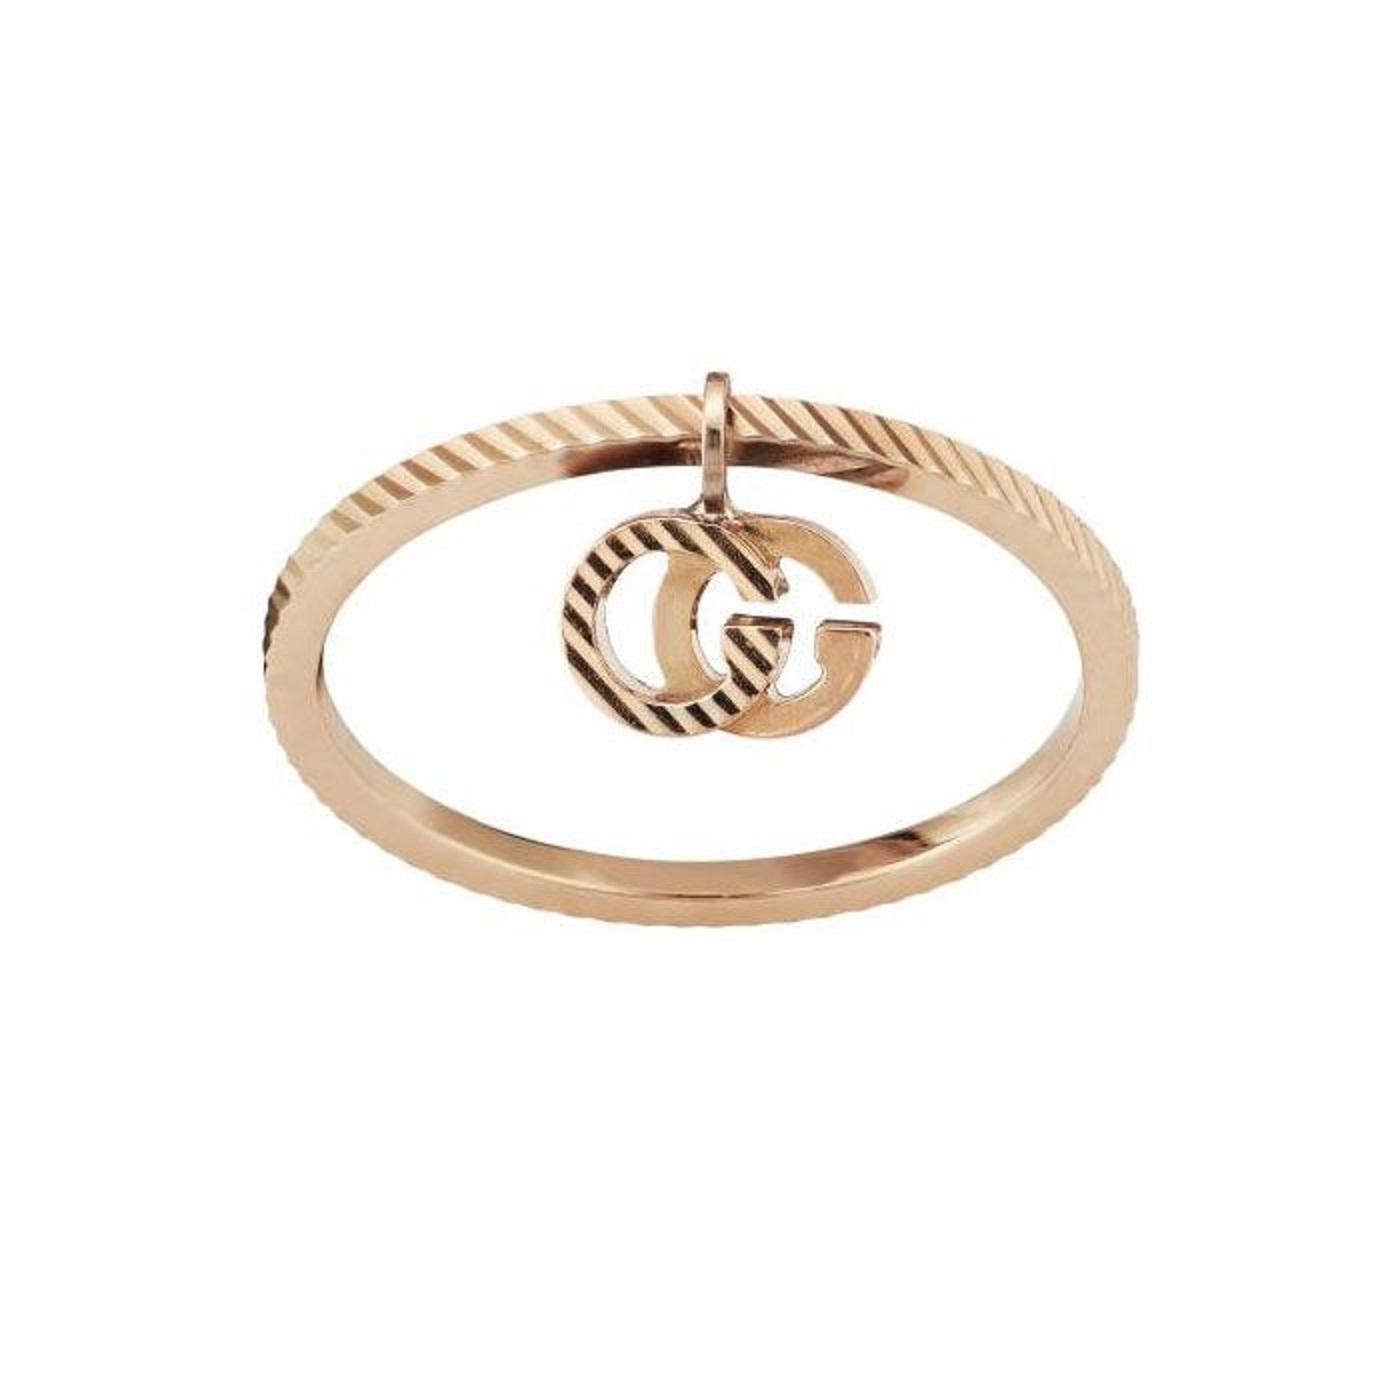 Signature GG Running styles, featuring the emblematic Double G, return as part of Gucci Love Parade, this time in a rose gold variation. The motif features here as a delicate pendant attached to this 18k ring of a classic design.

    18k rose gold
